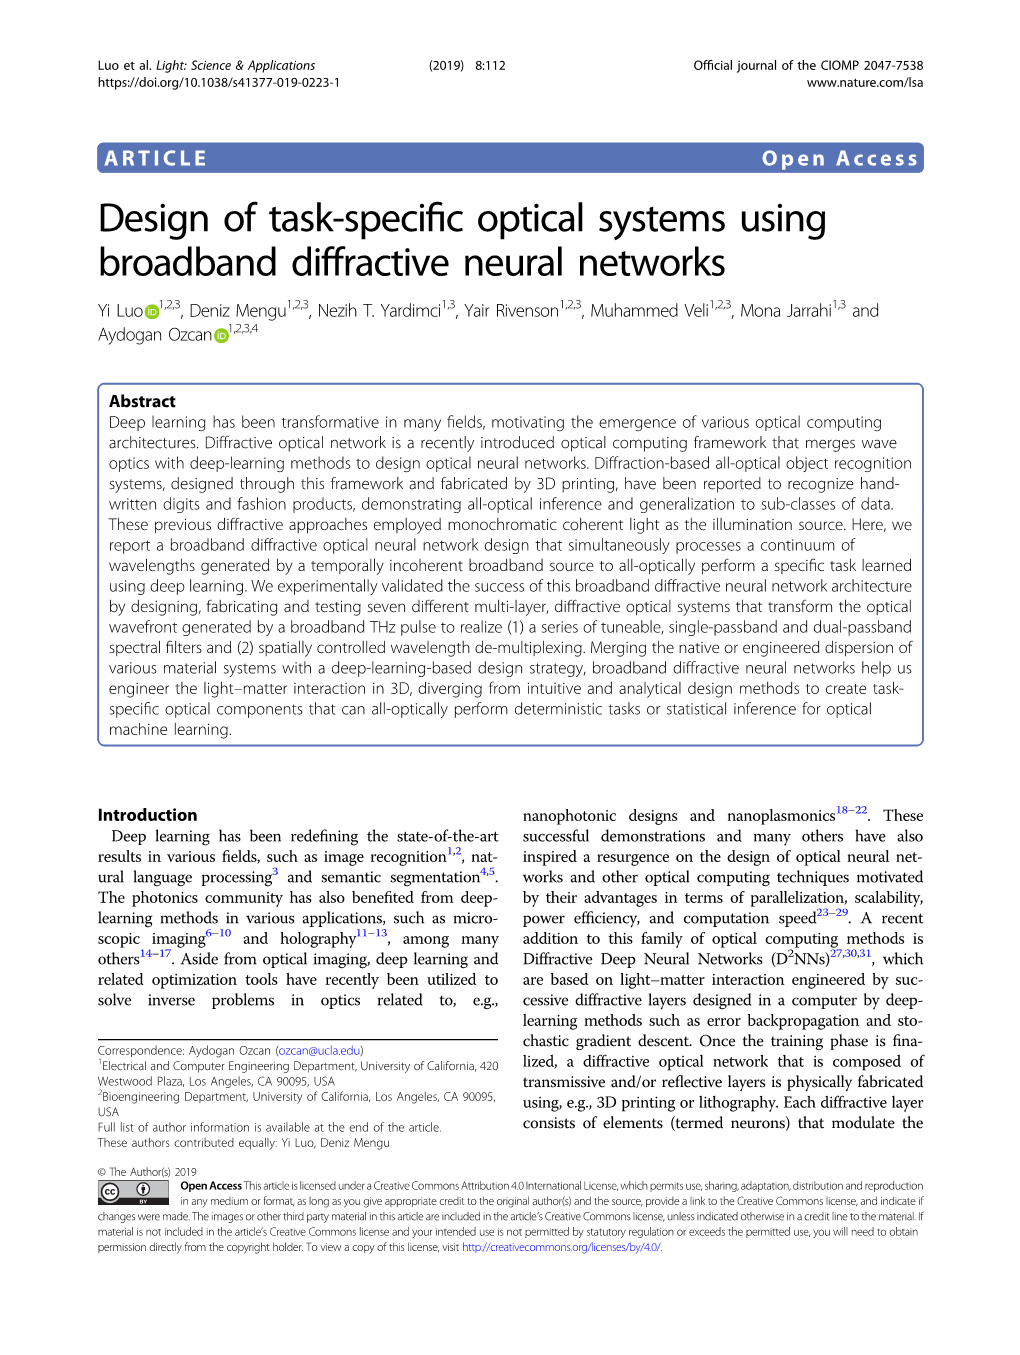 Design of Task-Specific Optical Systems Using Broadband Diffractive Neural